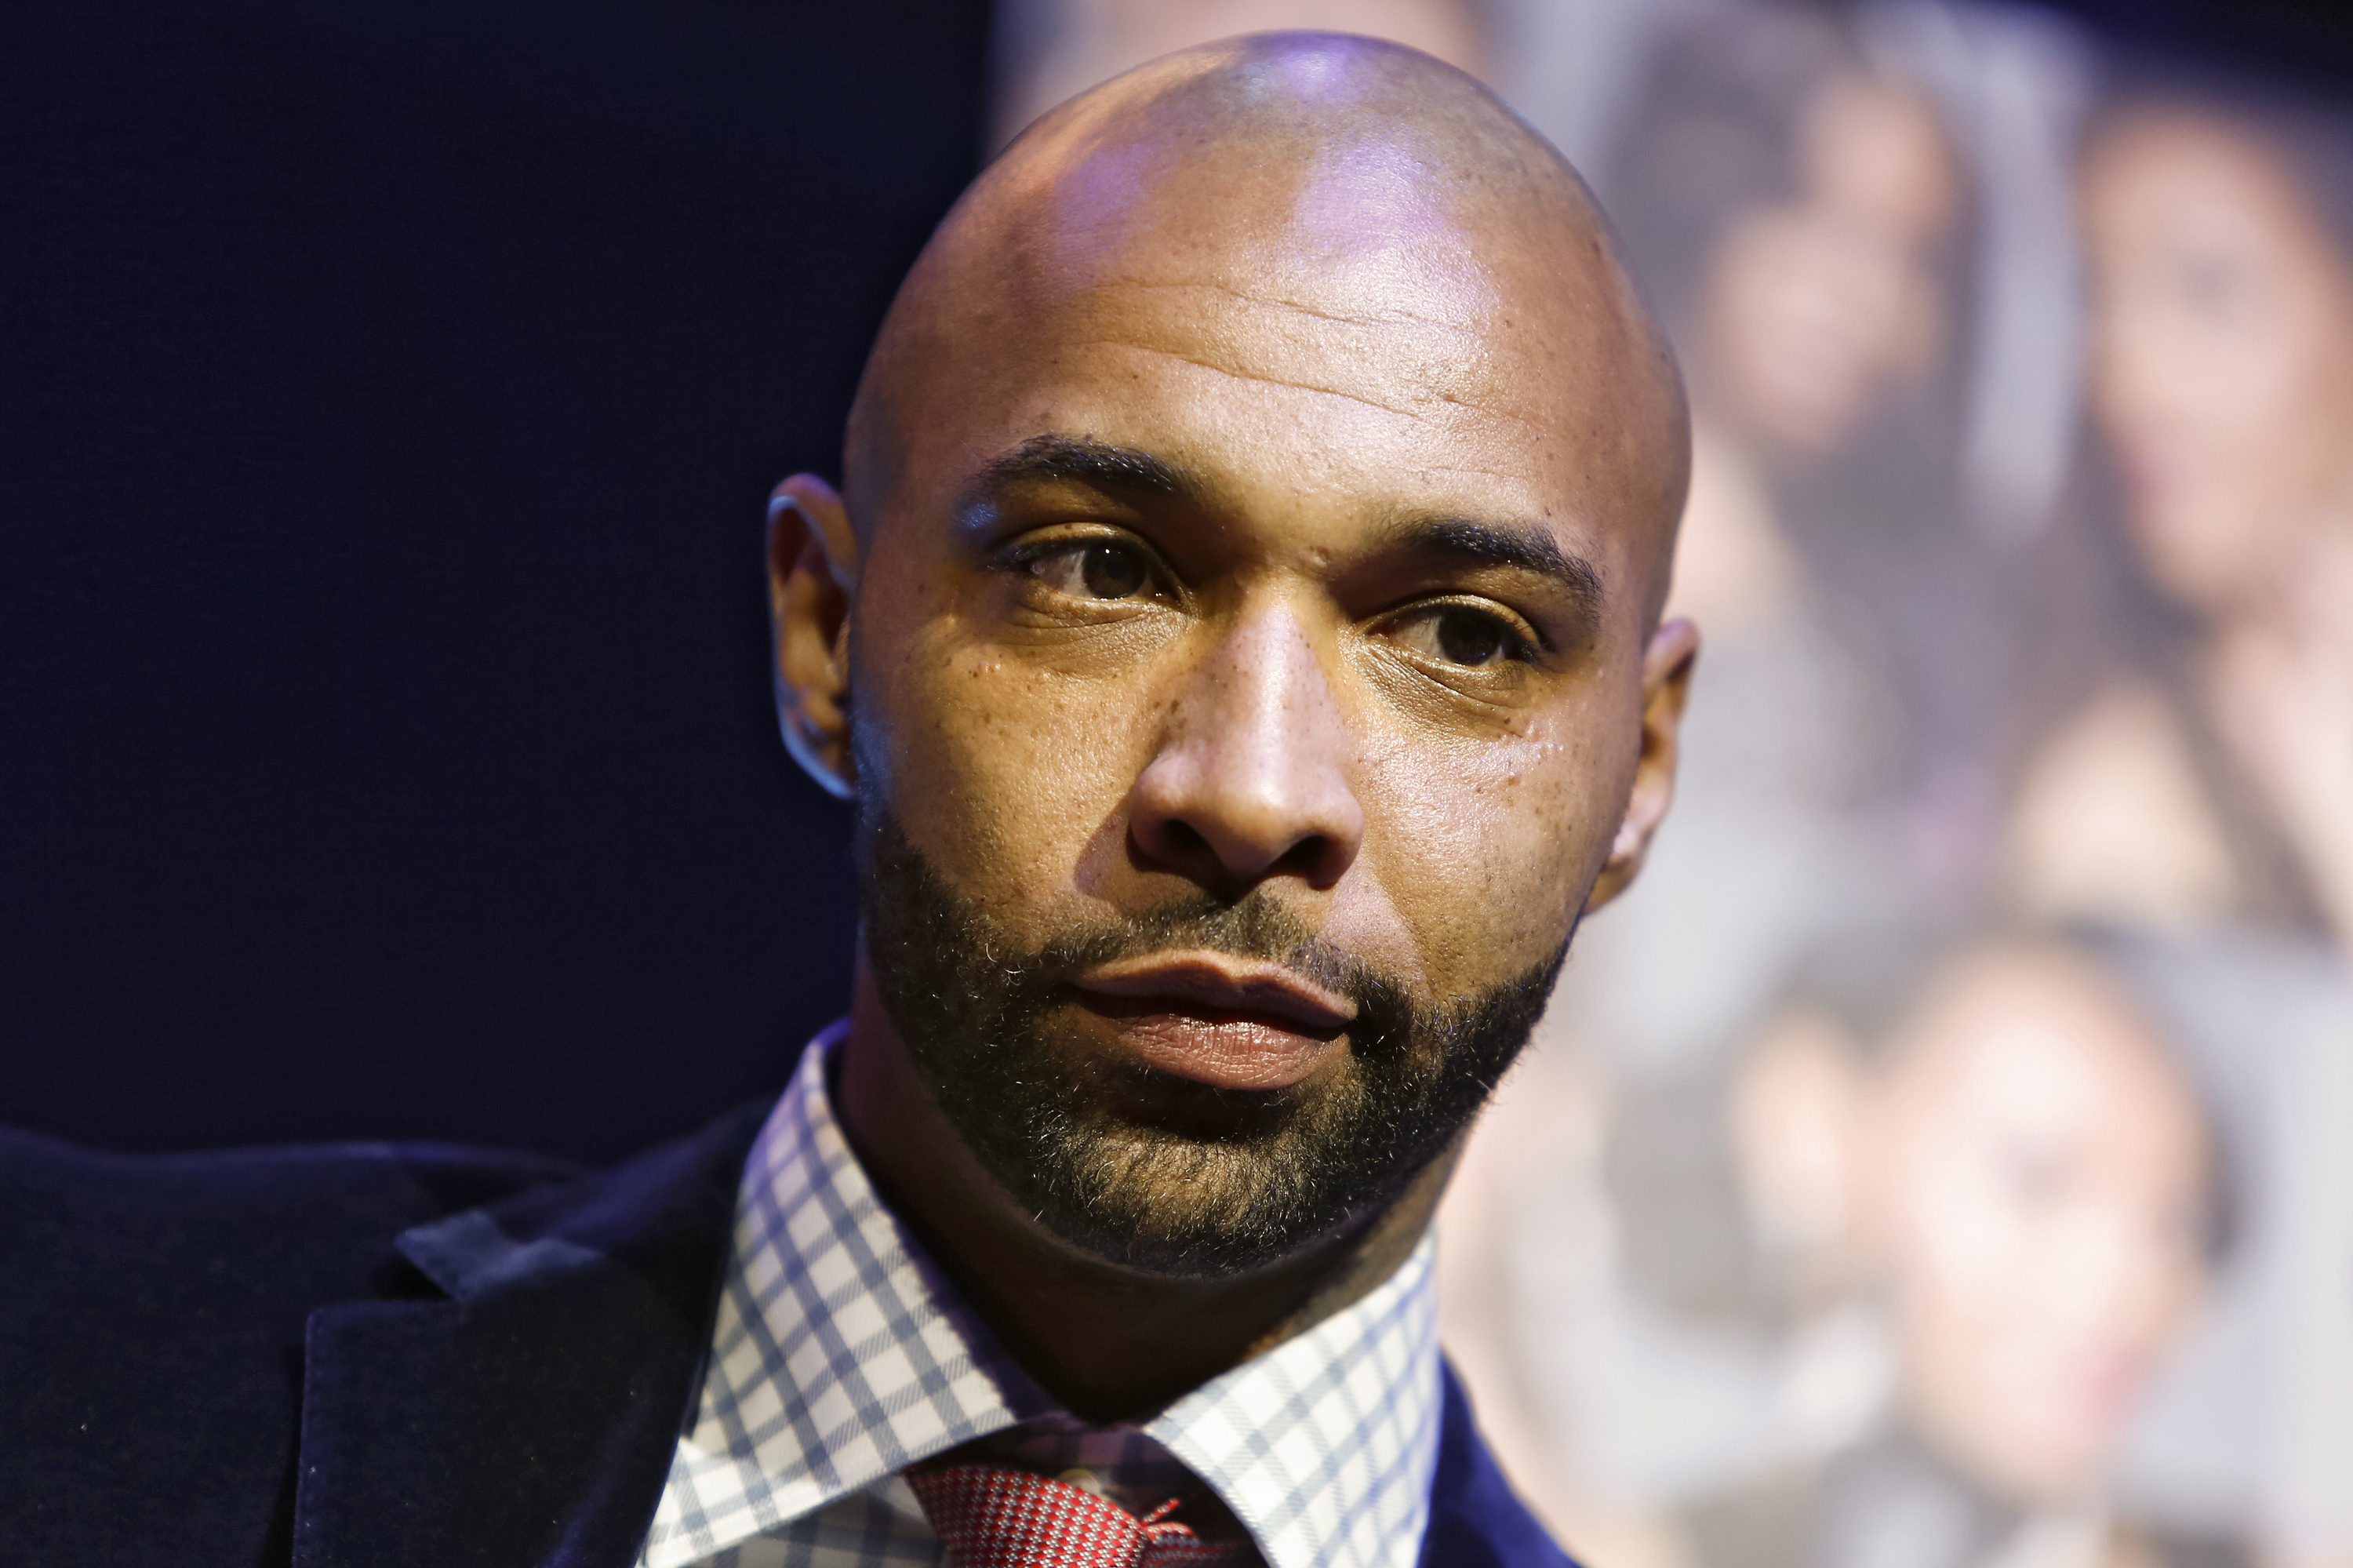 Joe Budden Reacts To Rory & Mal’s New Video On IG Live